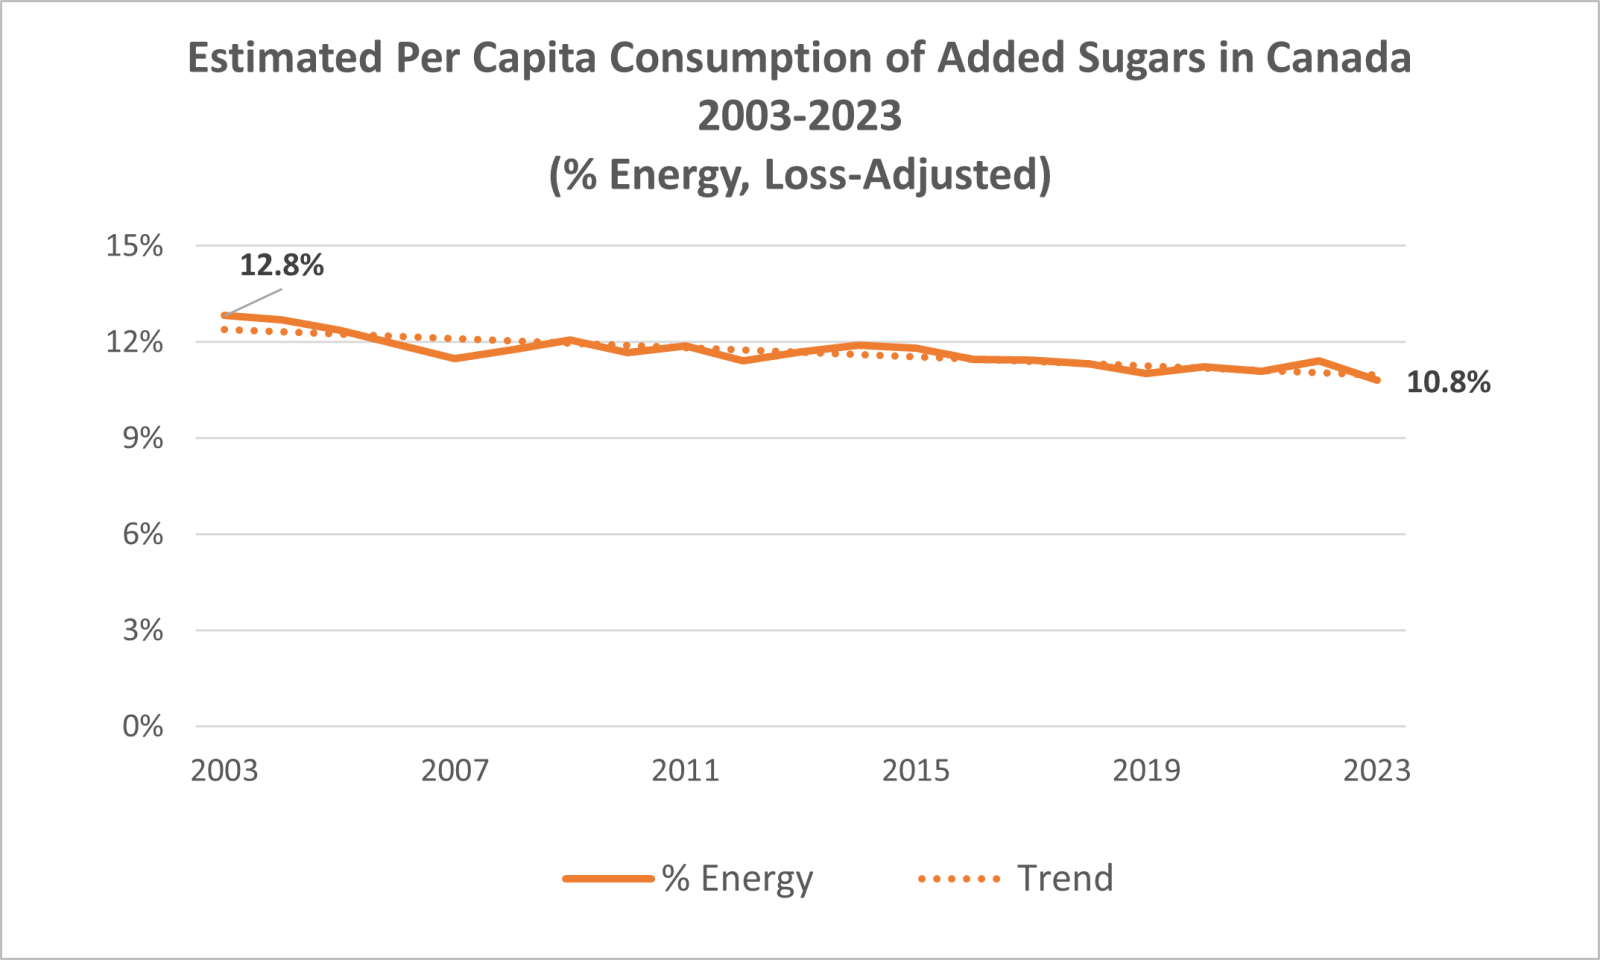 Graph showing estimated per capita consumption of added sugars in Canada from 2002-2022